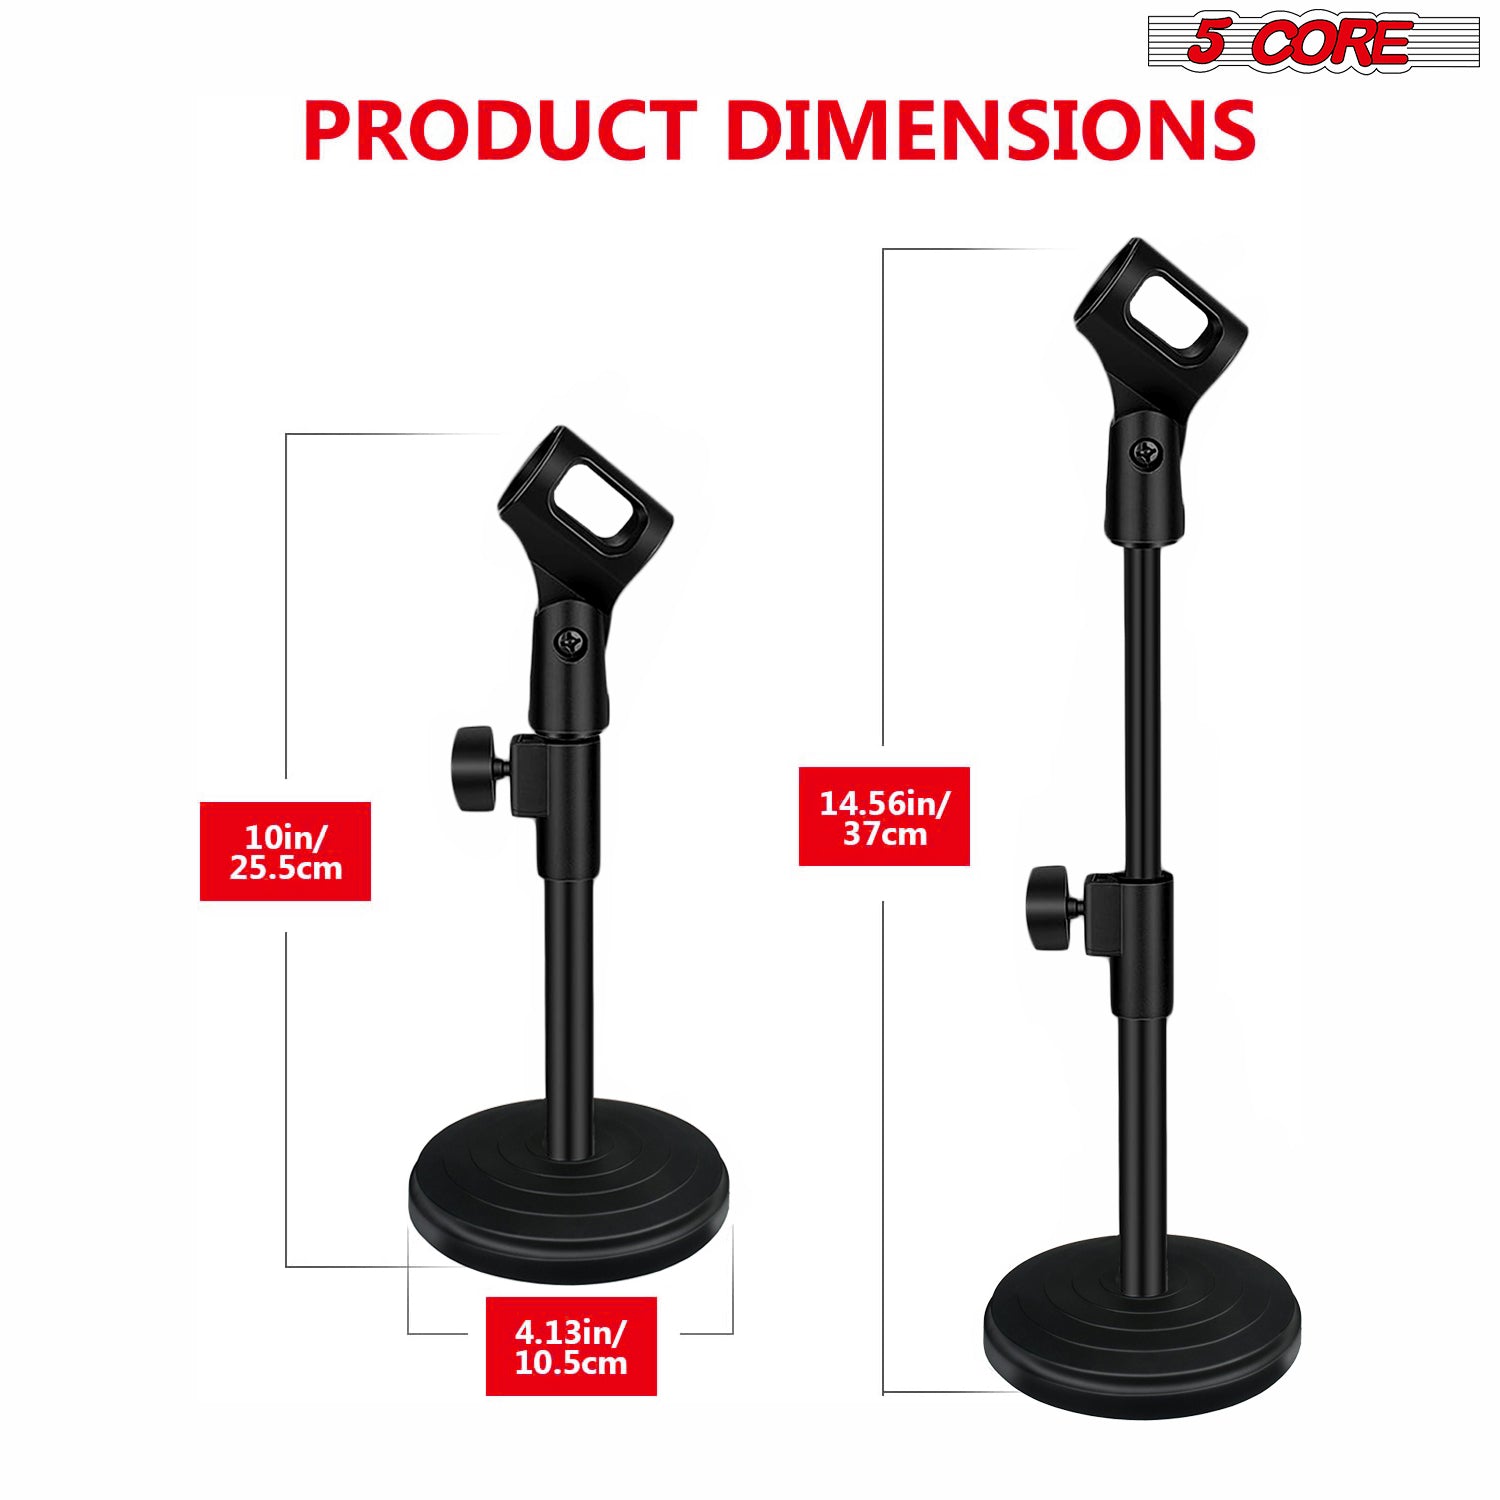 5 Core Round Base Mic Stand Desk Universal Desktop Height Adjustable Table Top Microphone Stand w Mic CLip 1/2 pc